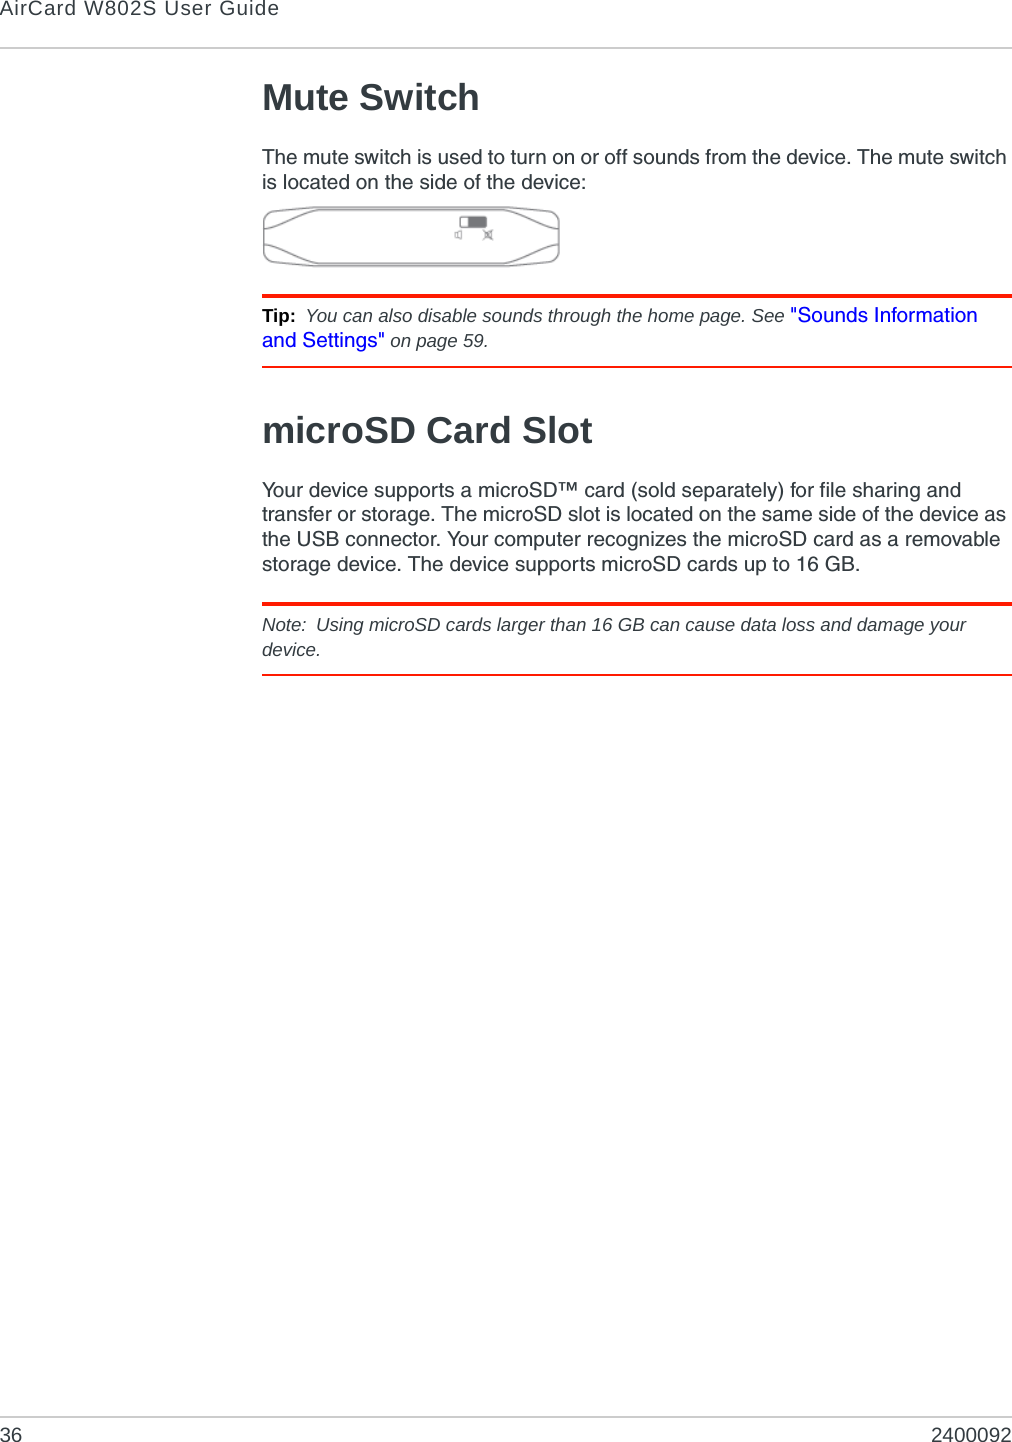 AirCard W802S User Guide36 2400092Mute SwitchThe mute switch is used to turn on or off sounds from the device. The mute switch is located on the side of the device:Tip: You can also disable sounds through the home page. See &quot;Sounds Information and Settings&quot; on page 59.microSD Card SlotYour device supports a microSD™ card (sold separately) for file sharing and transfer or storage. The microSD slot is located on the same side of the device as the USB connector. Your computer recognizes the microSD card as a removable storage device. The device supports microSD cards up to 16 GB.Note: Using microSD cards larger than 16 GB can cause data loss and damage your device.